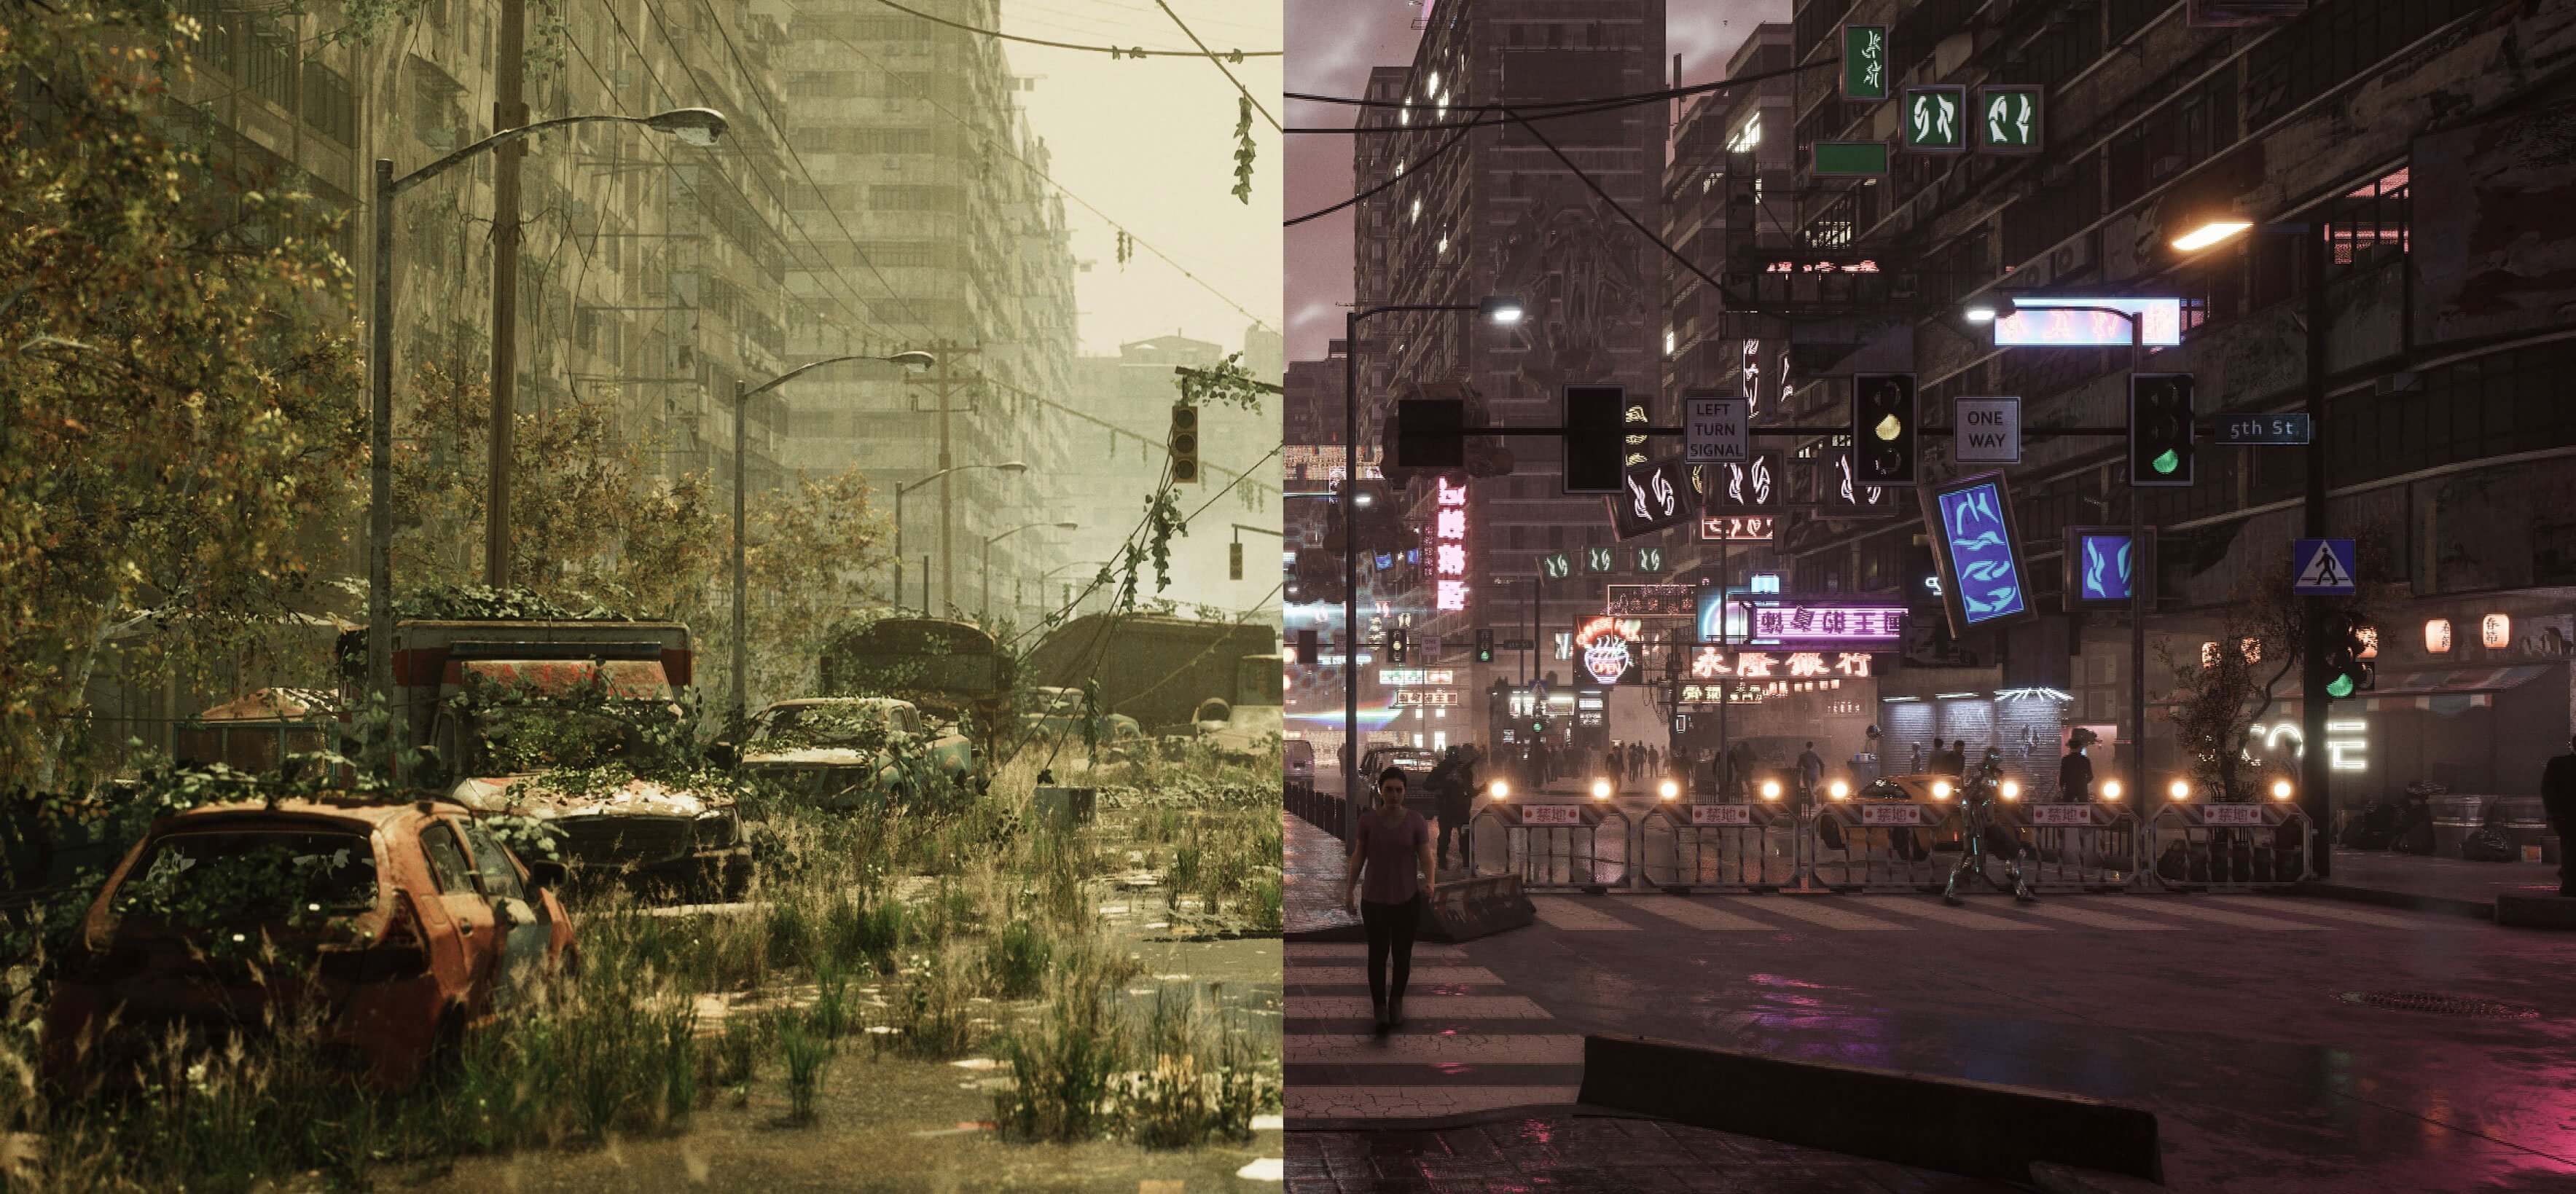 Creating Apocalyptic, Cyberpunk Worlds in Unreal Engine